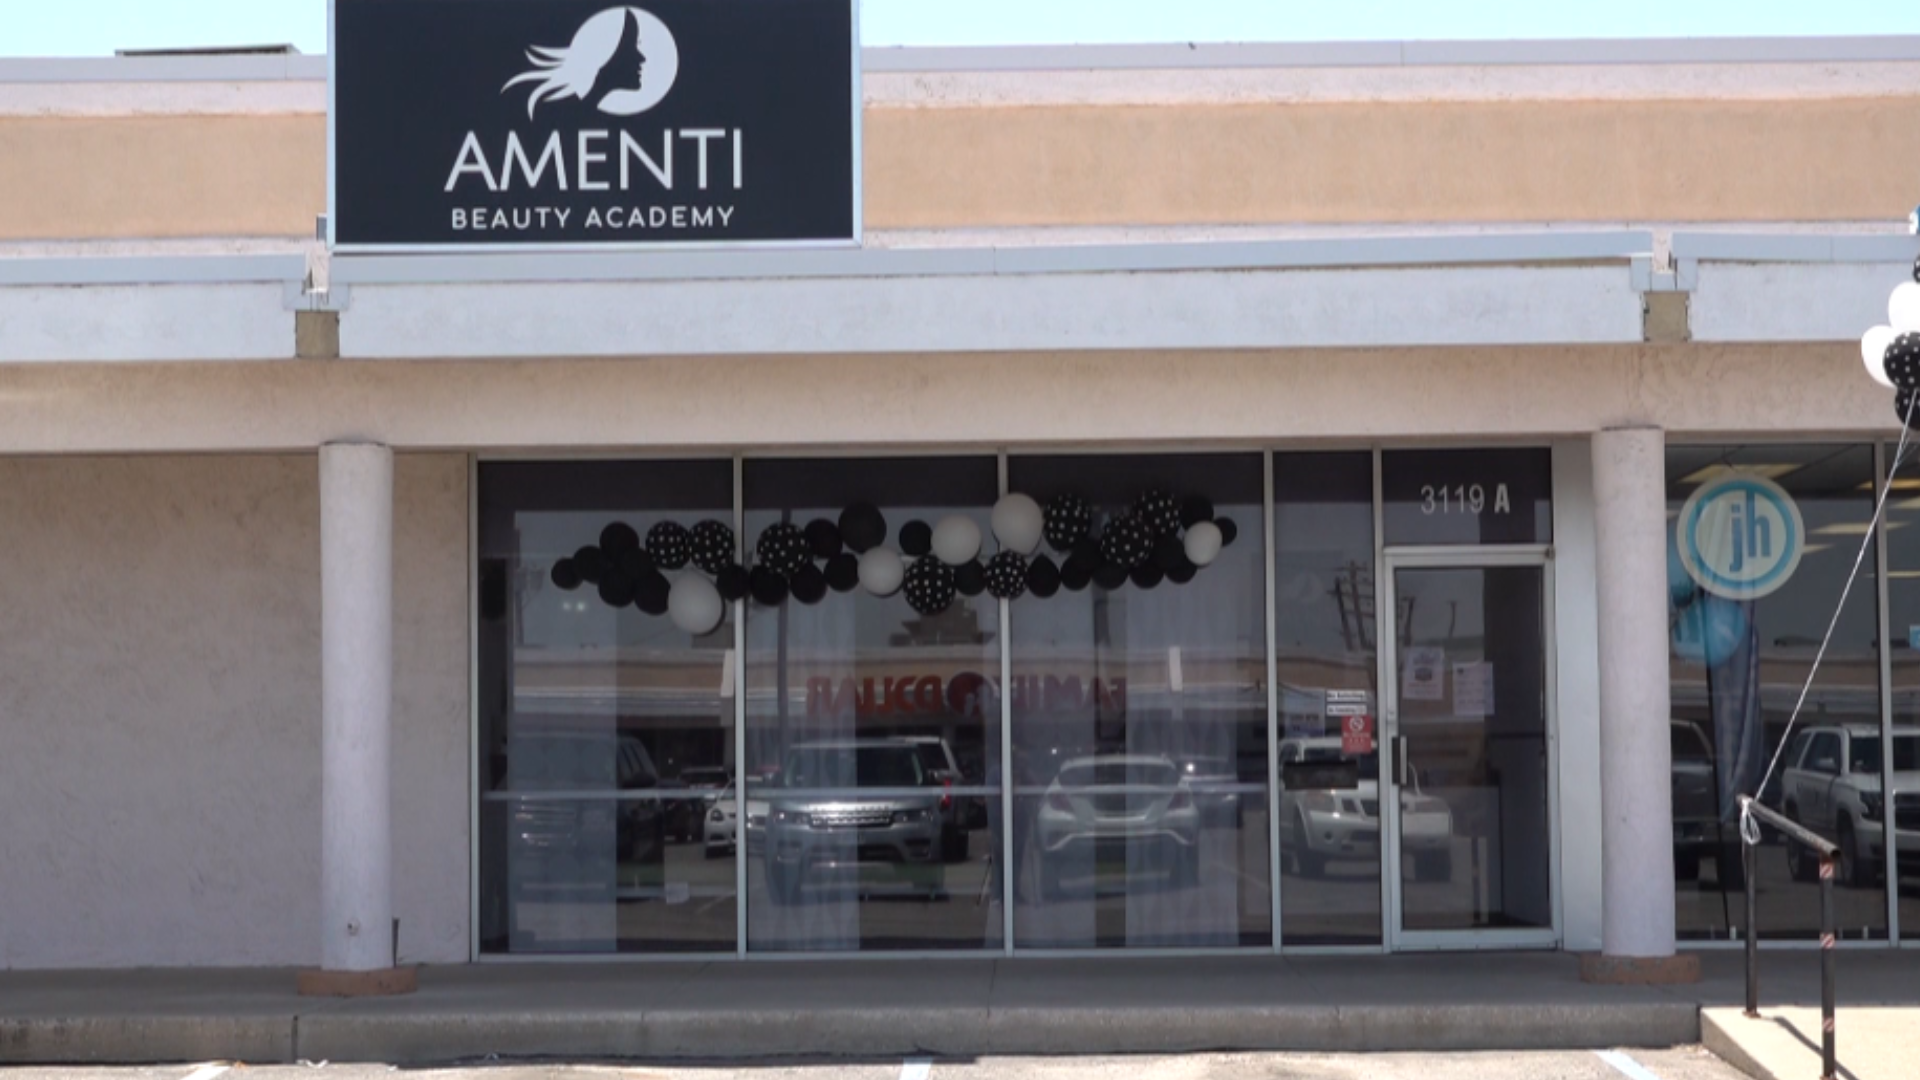 Nancy Davis, owner of Amenti Beauty Academy, saw a need for a particular business and began putting her plan in motion back when the pandemic started.